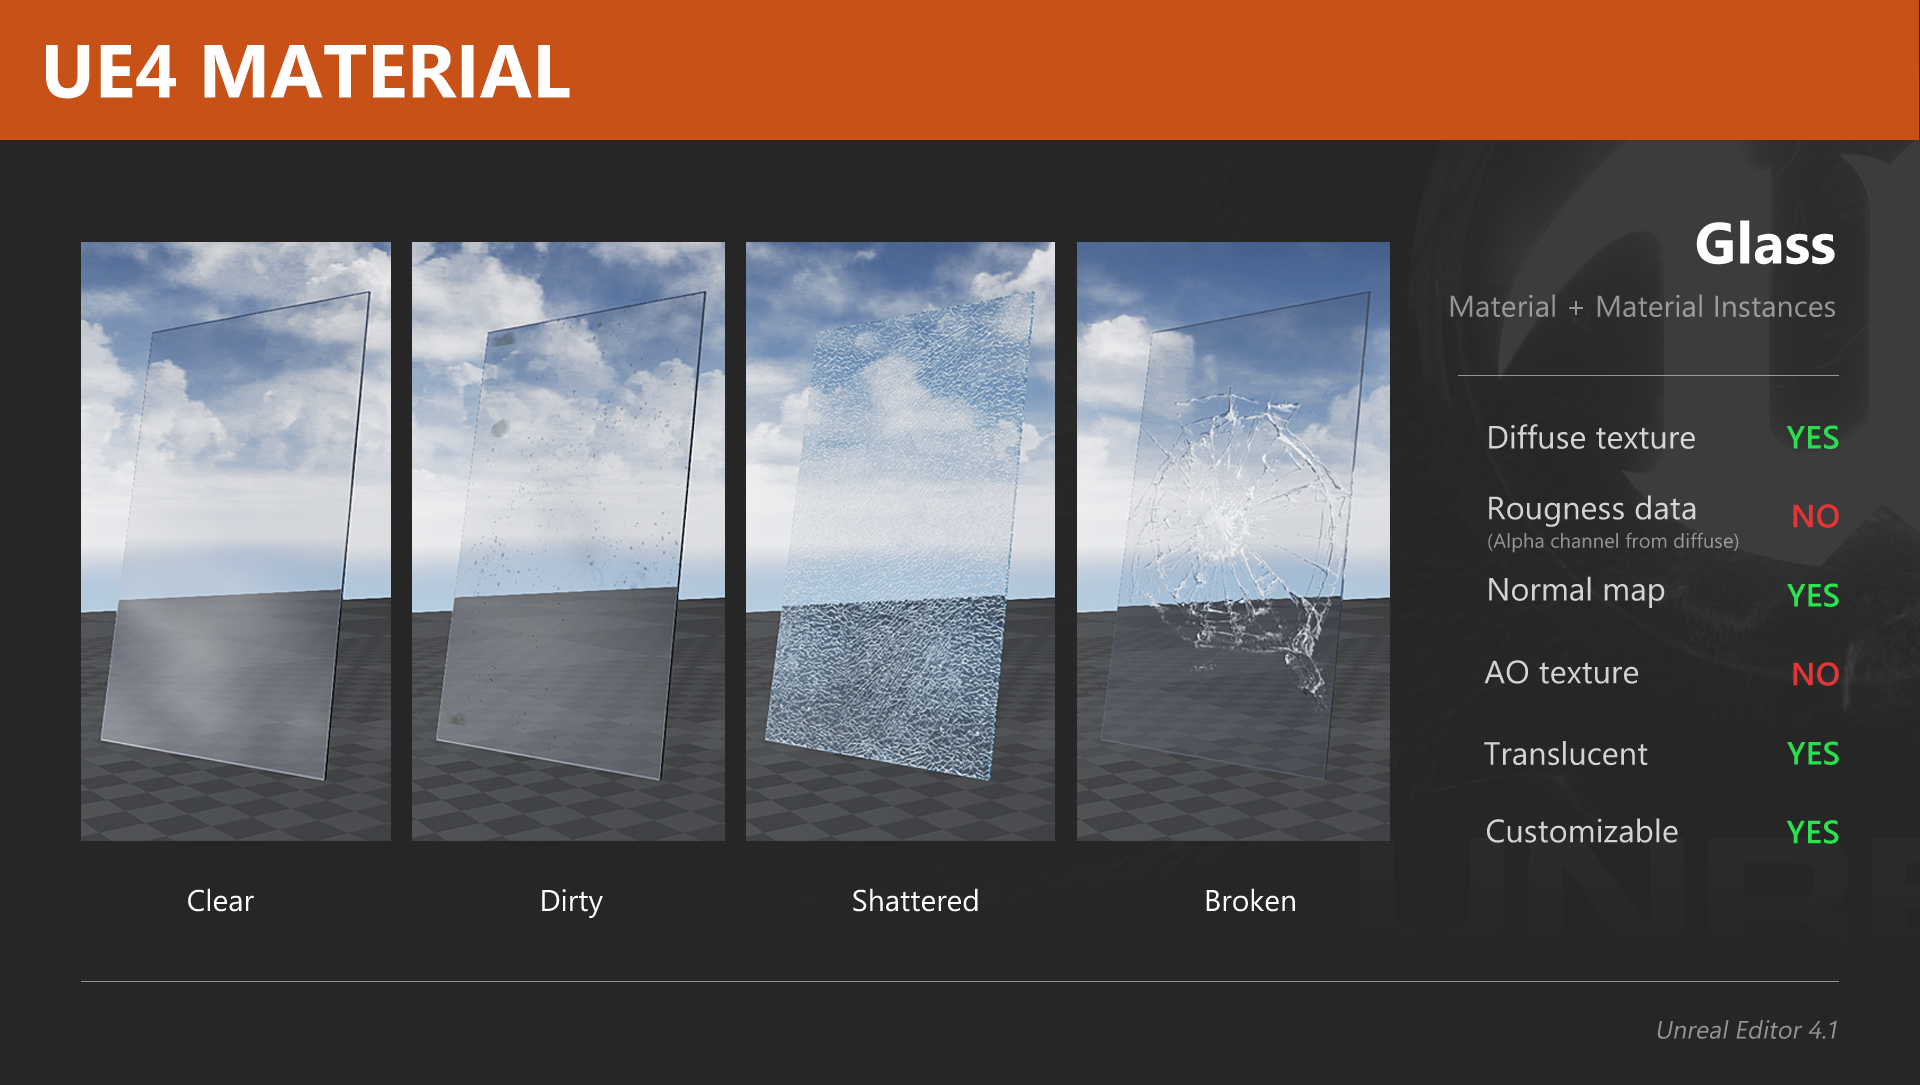 UE4 Material – Glass | Unreal Engine 4 blog